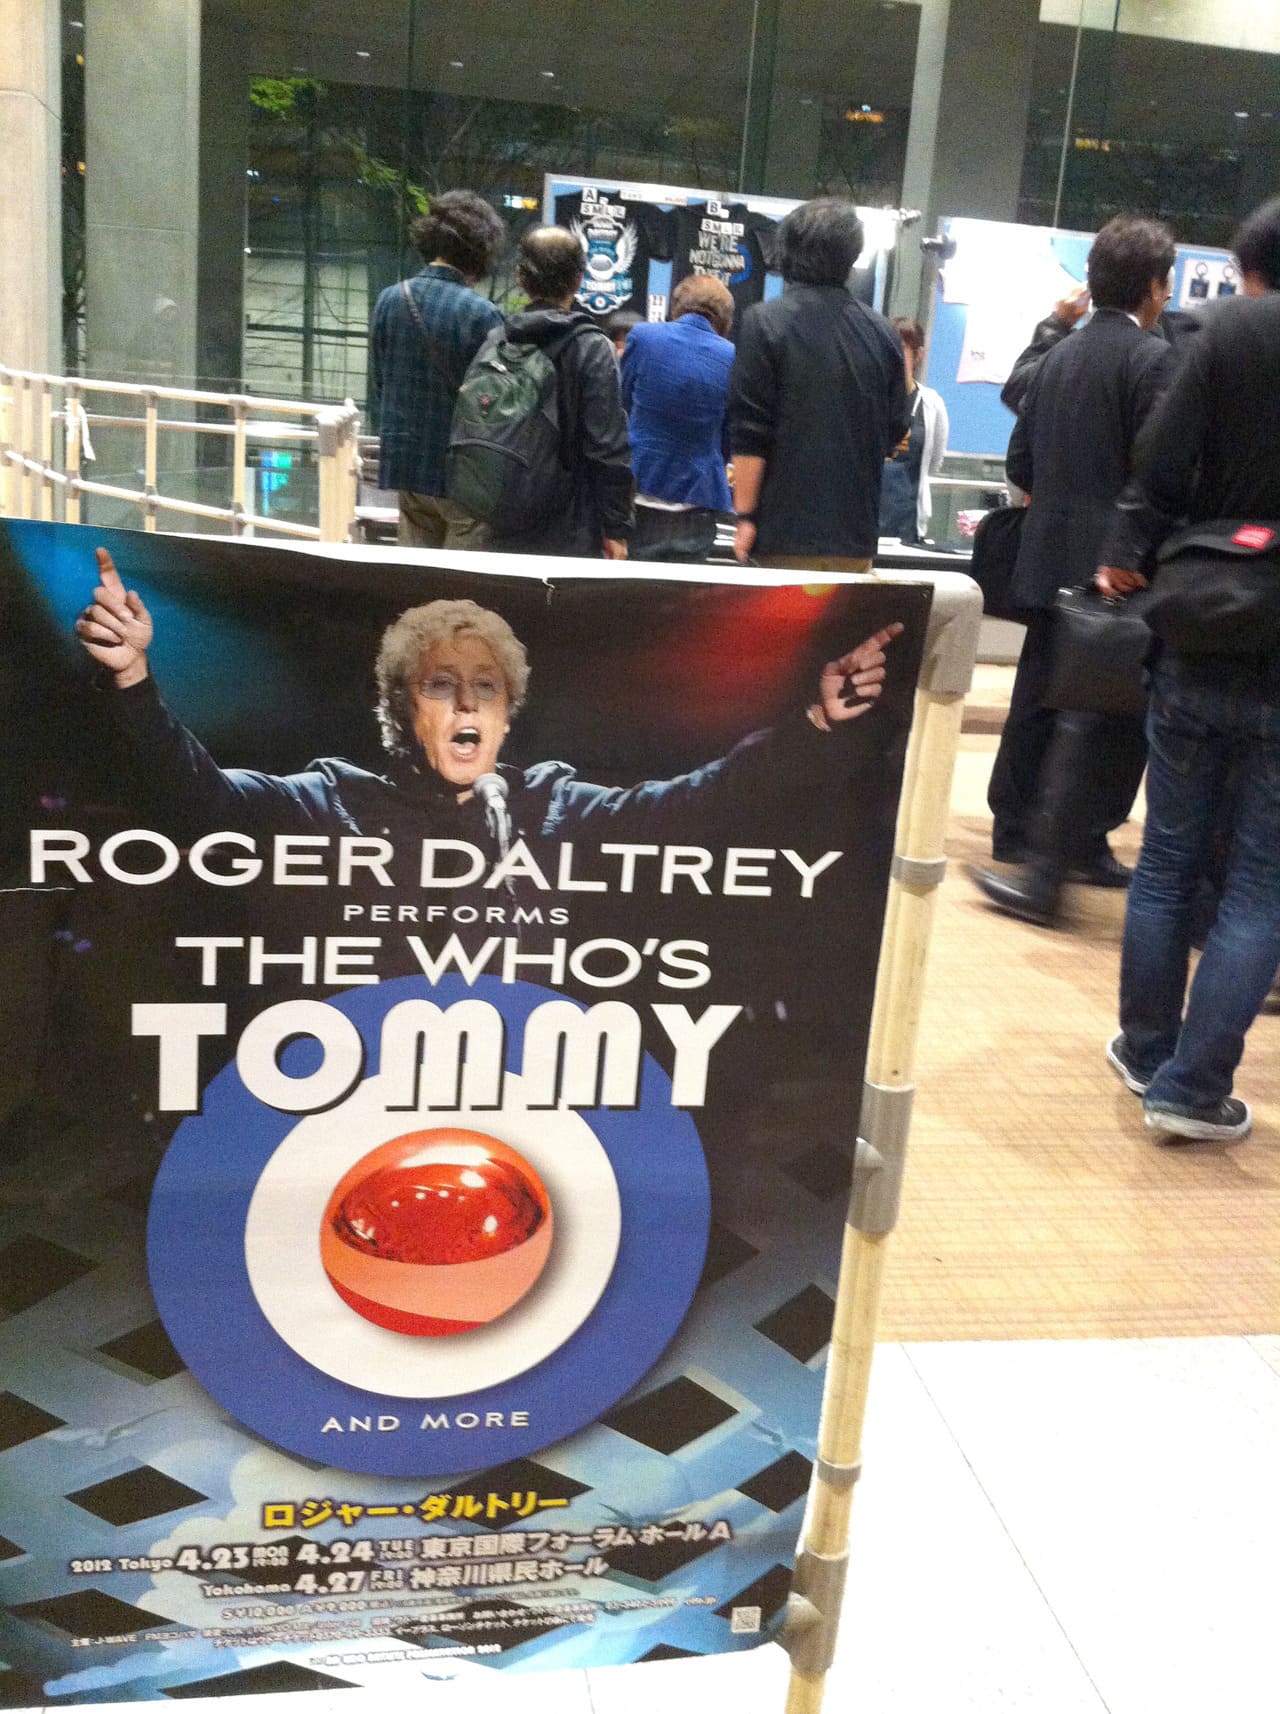 Roger Daltrey Performs The Who’s Tommy and More